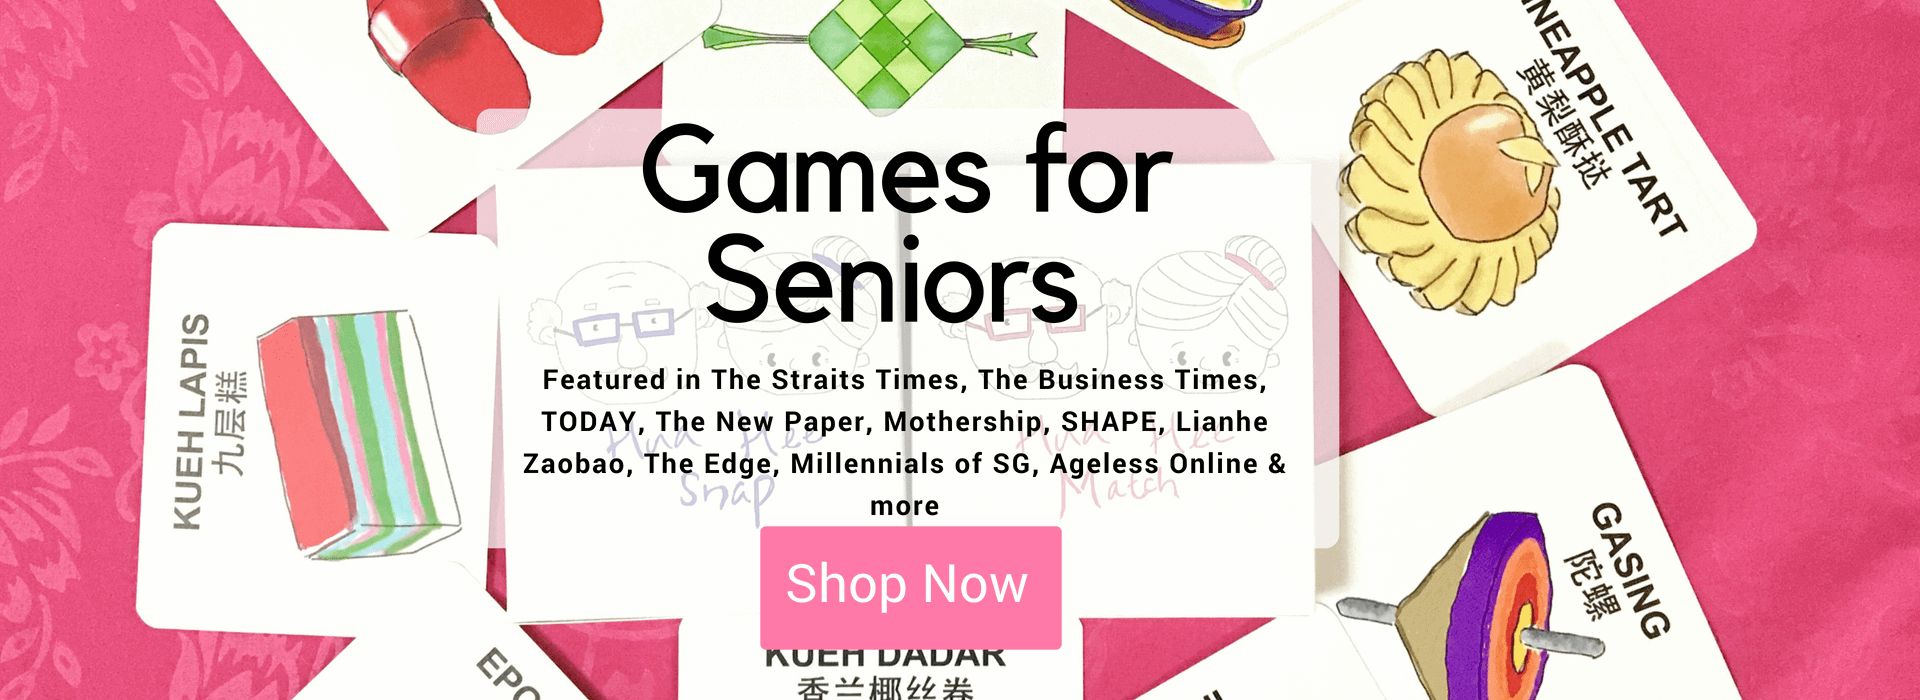 How do you engage seniors? Here are some games you can try